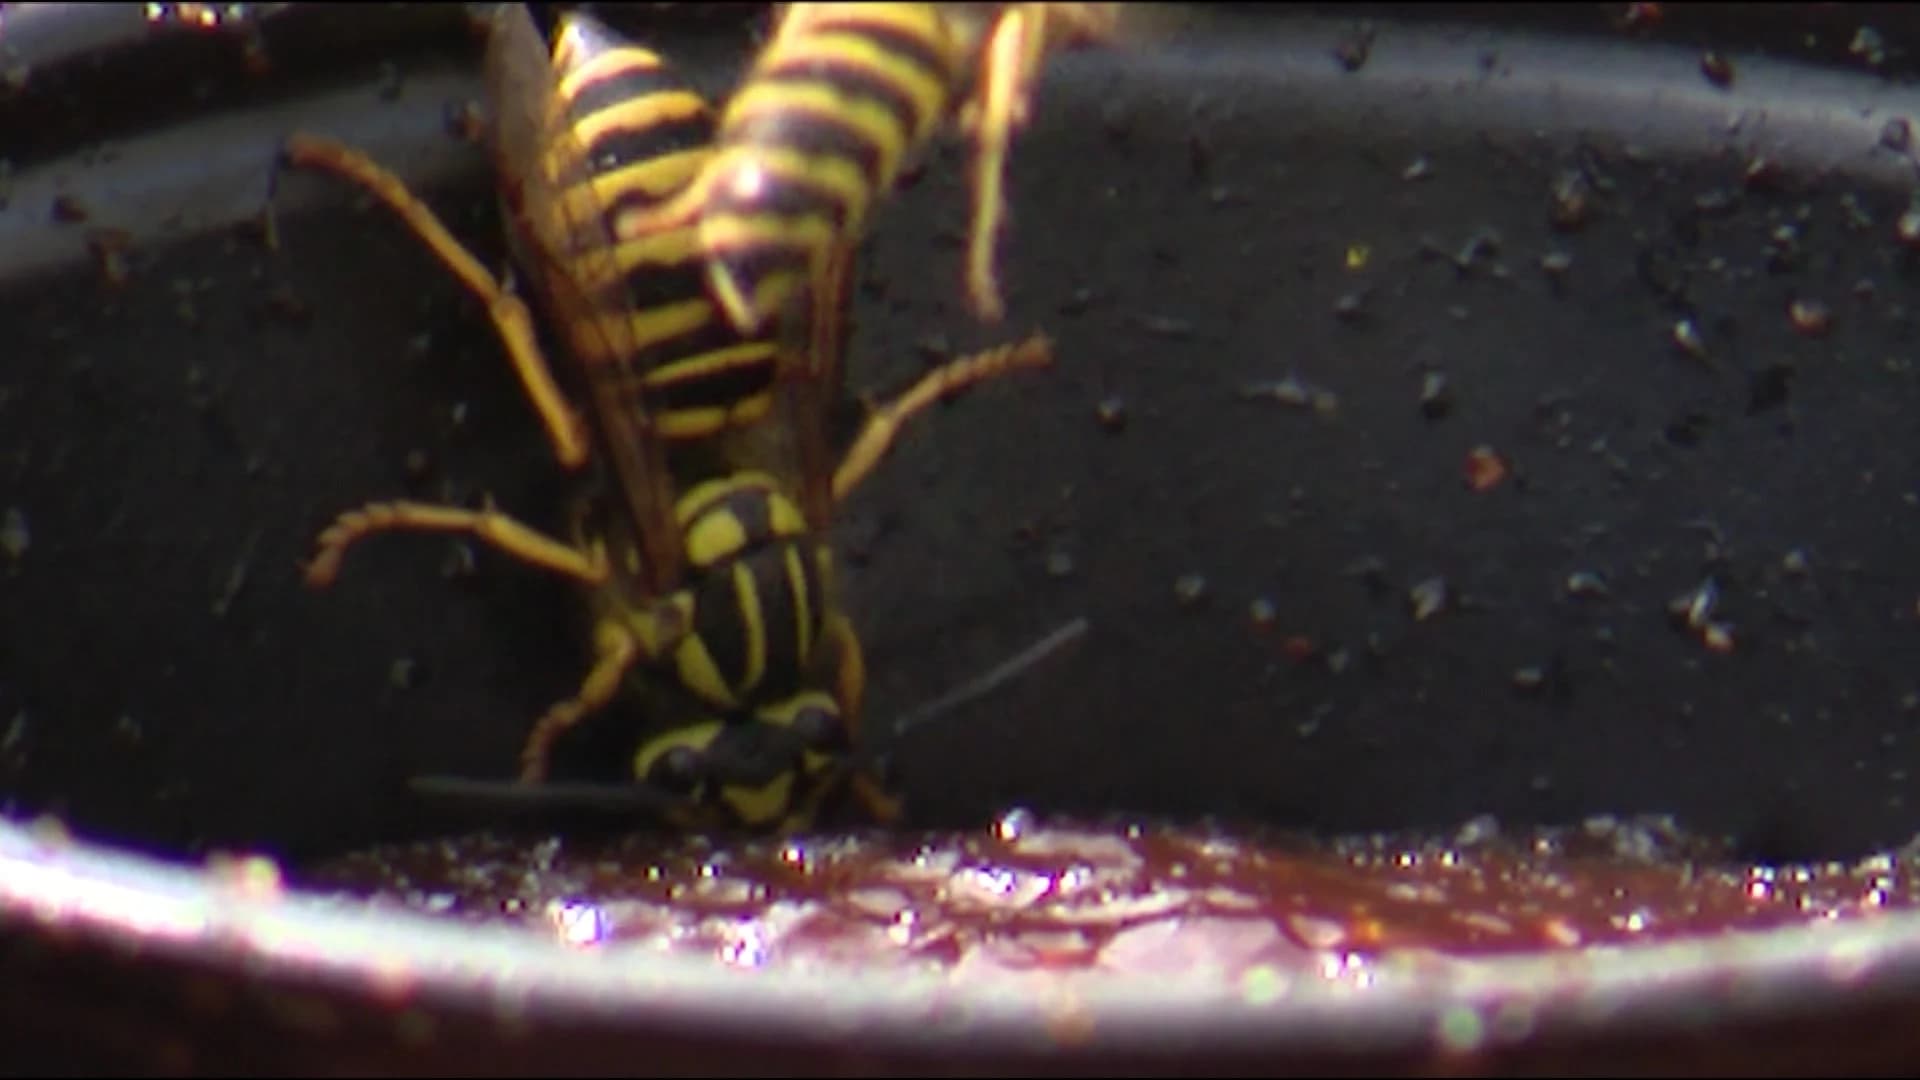 Wasps and yellow jackets buzzing away outdoor diners across Long Island